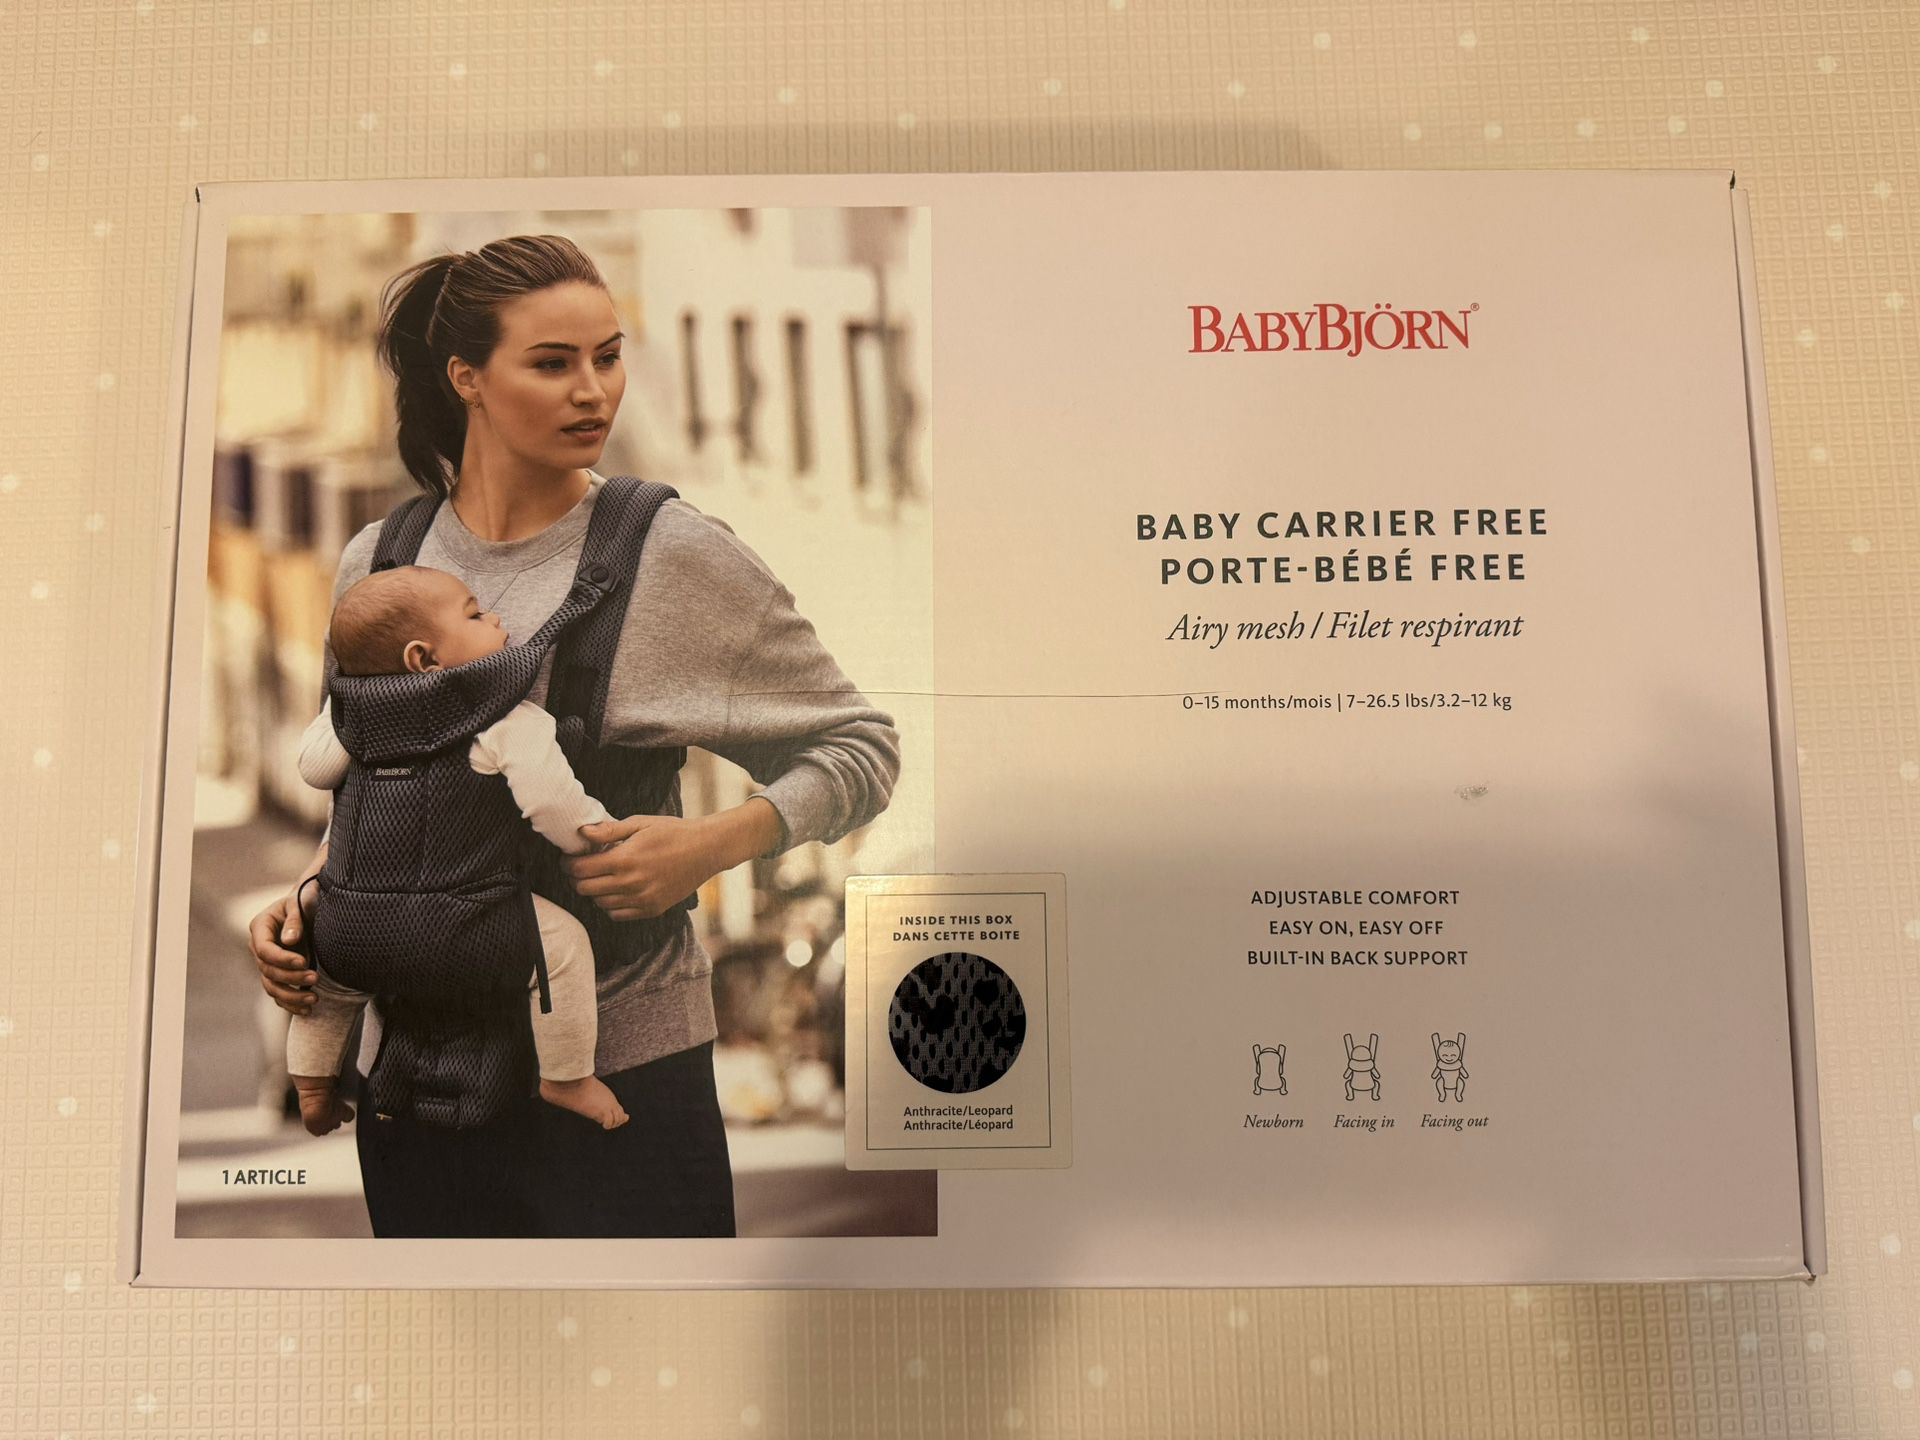 Babybjorn Baby Carrier free